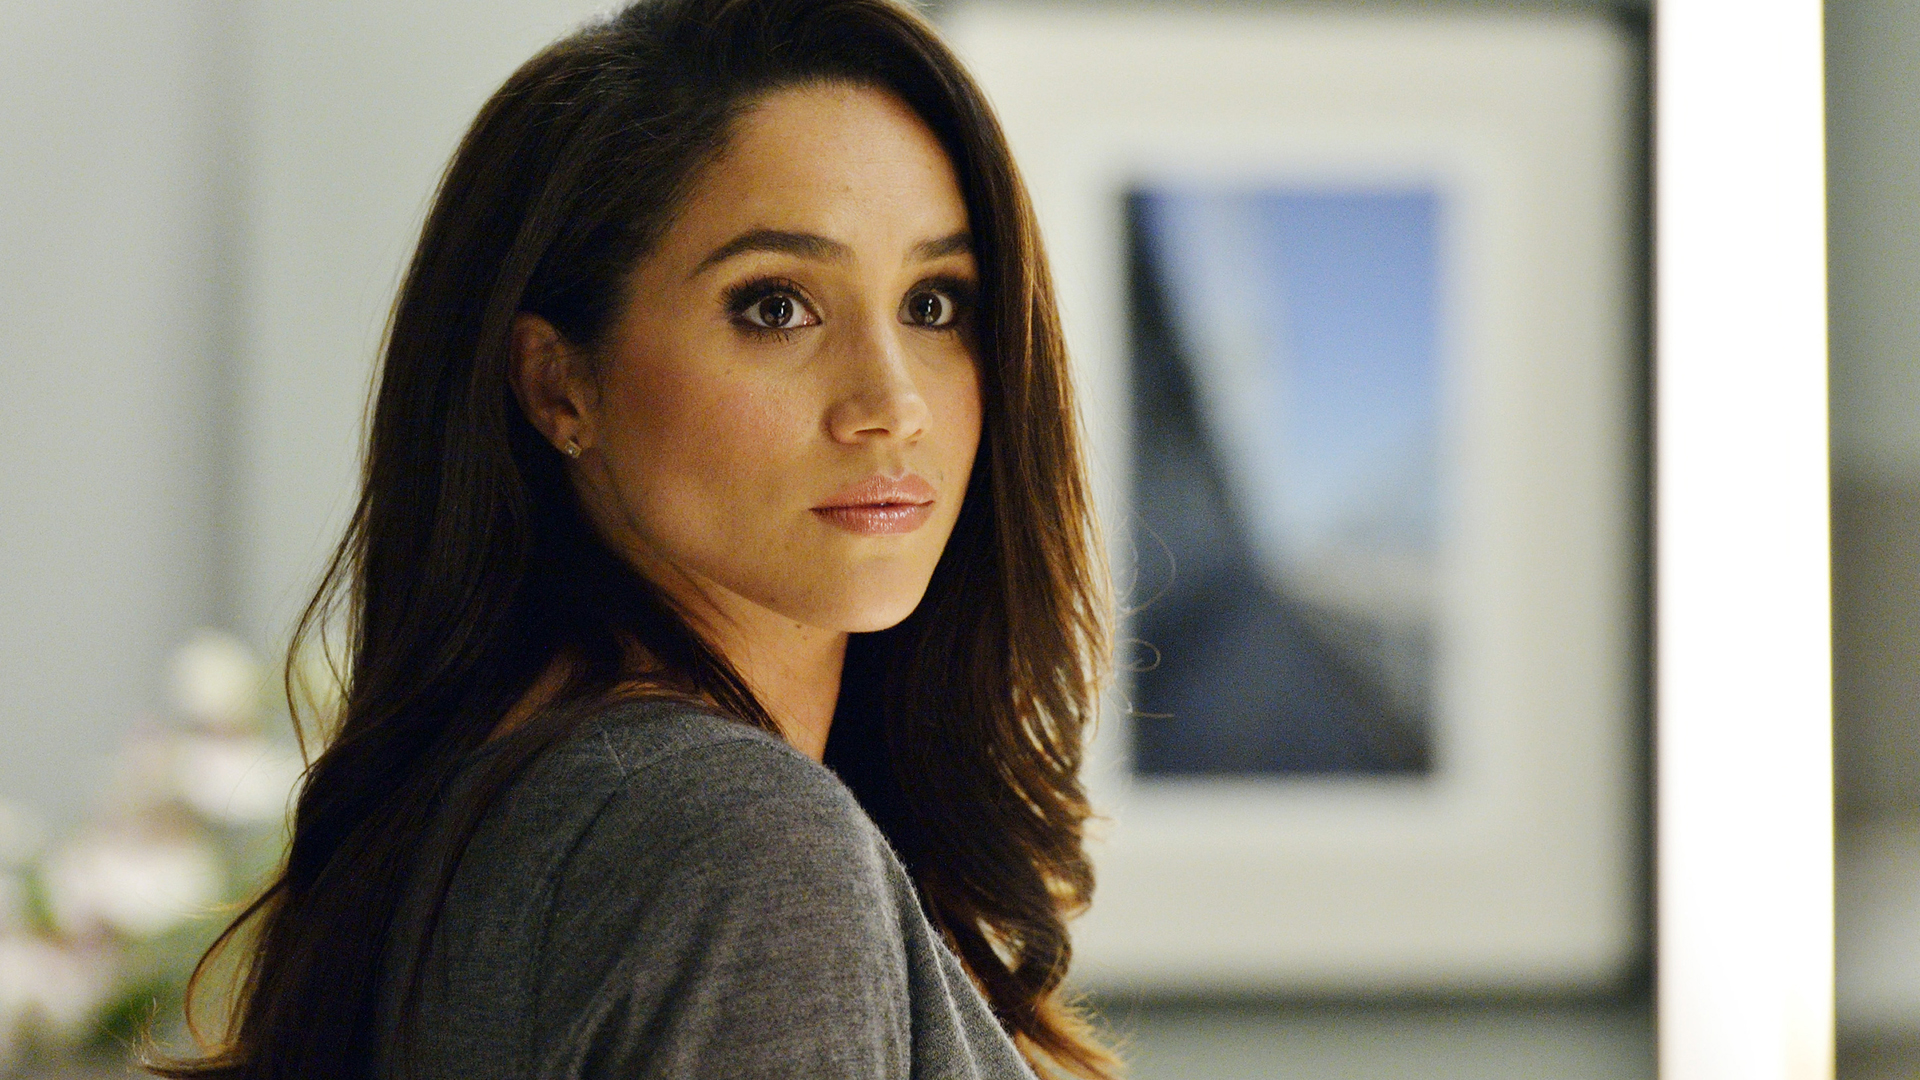 A close up of Megan Markle's Rachel Zane in the Suits TV show